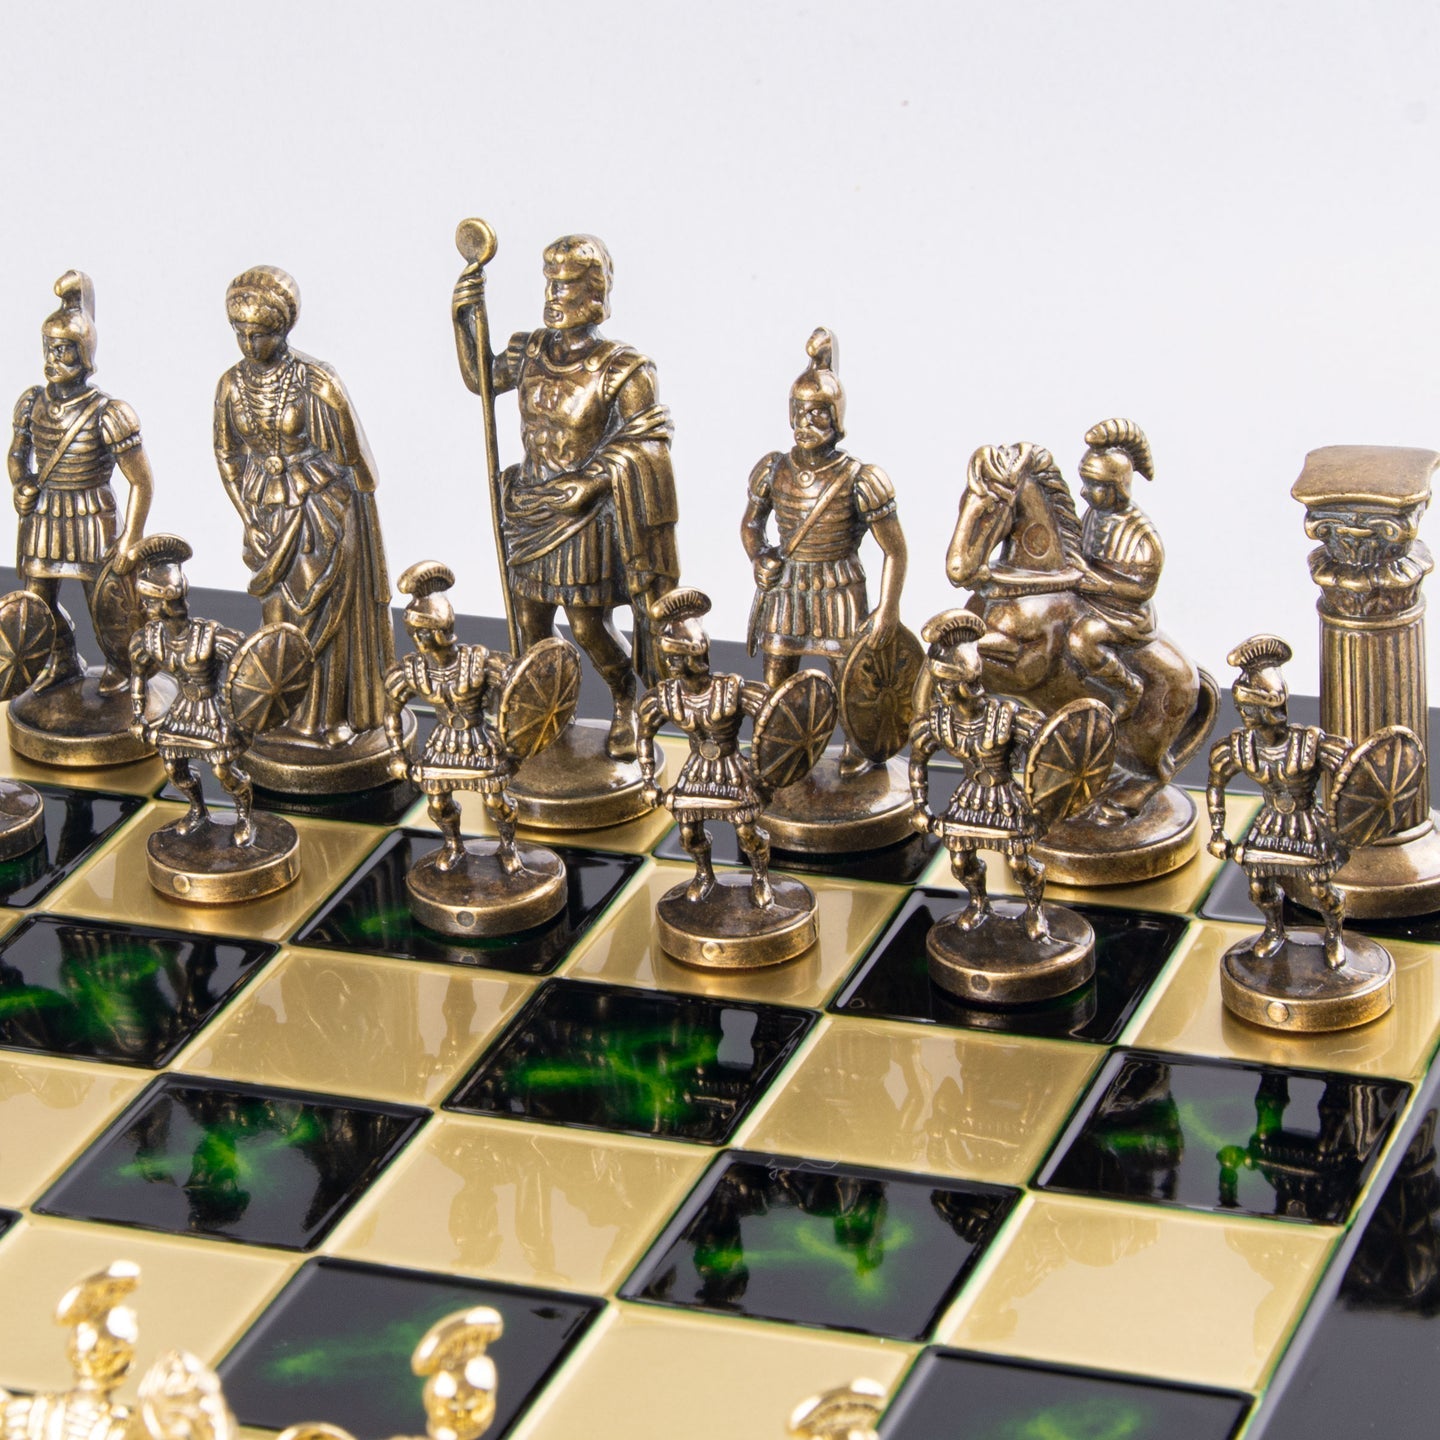 GREEK ROMAN PERIOD CHESS SET with gold/brown chessmen and bronze chessboard - 44 x 44cm (Large) - LAZADO